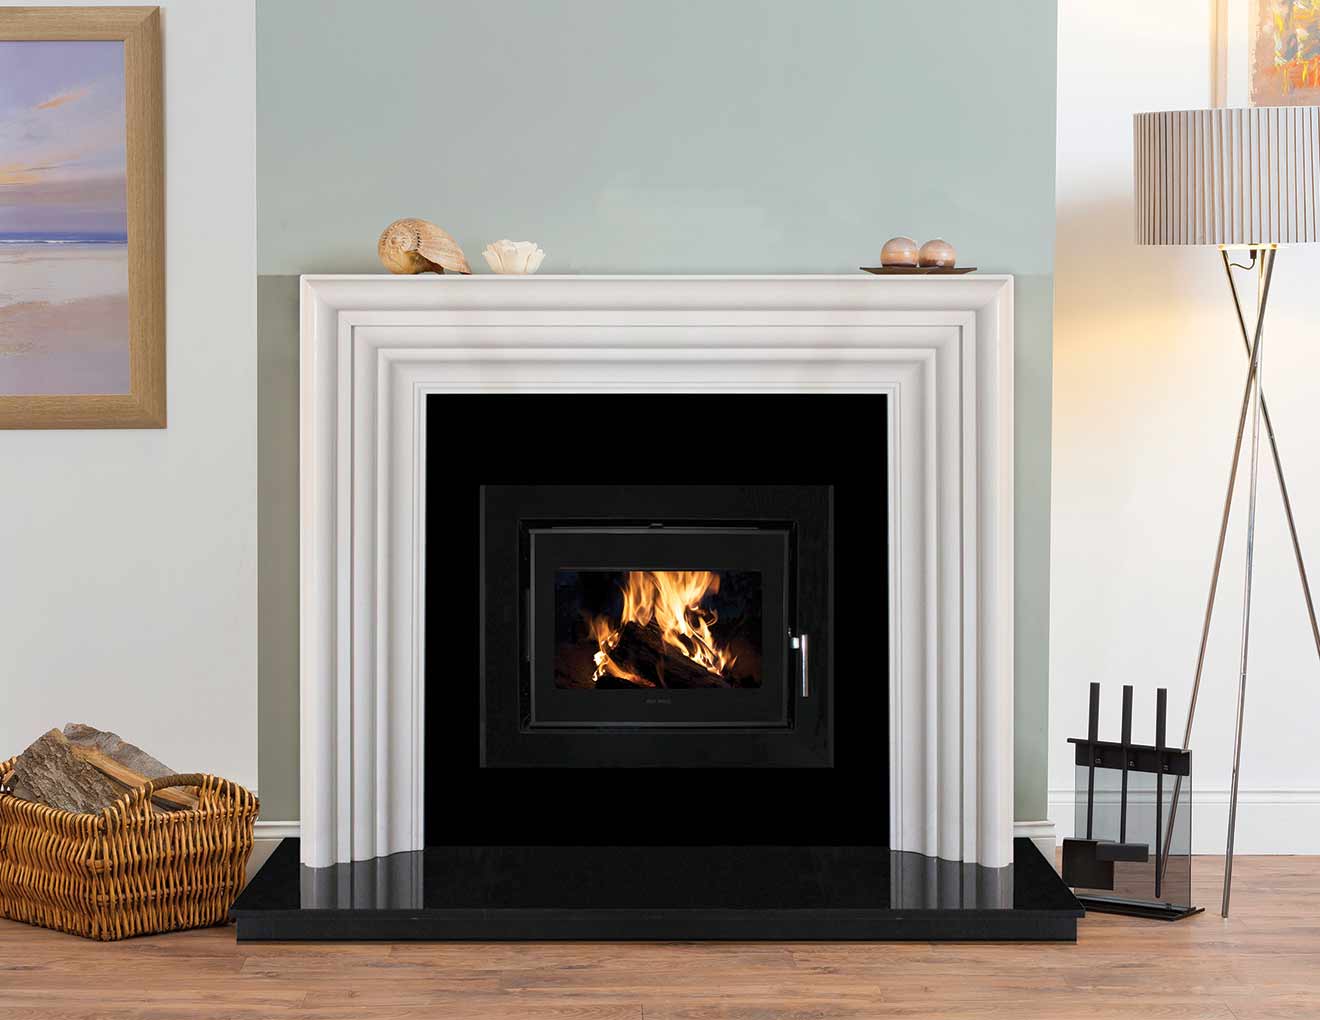 5kW-Landscape-Cassette-Stove-in-Heritage-Fireplace